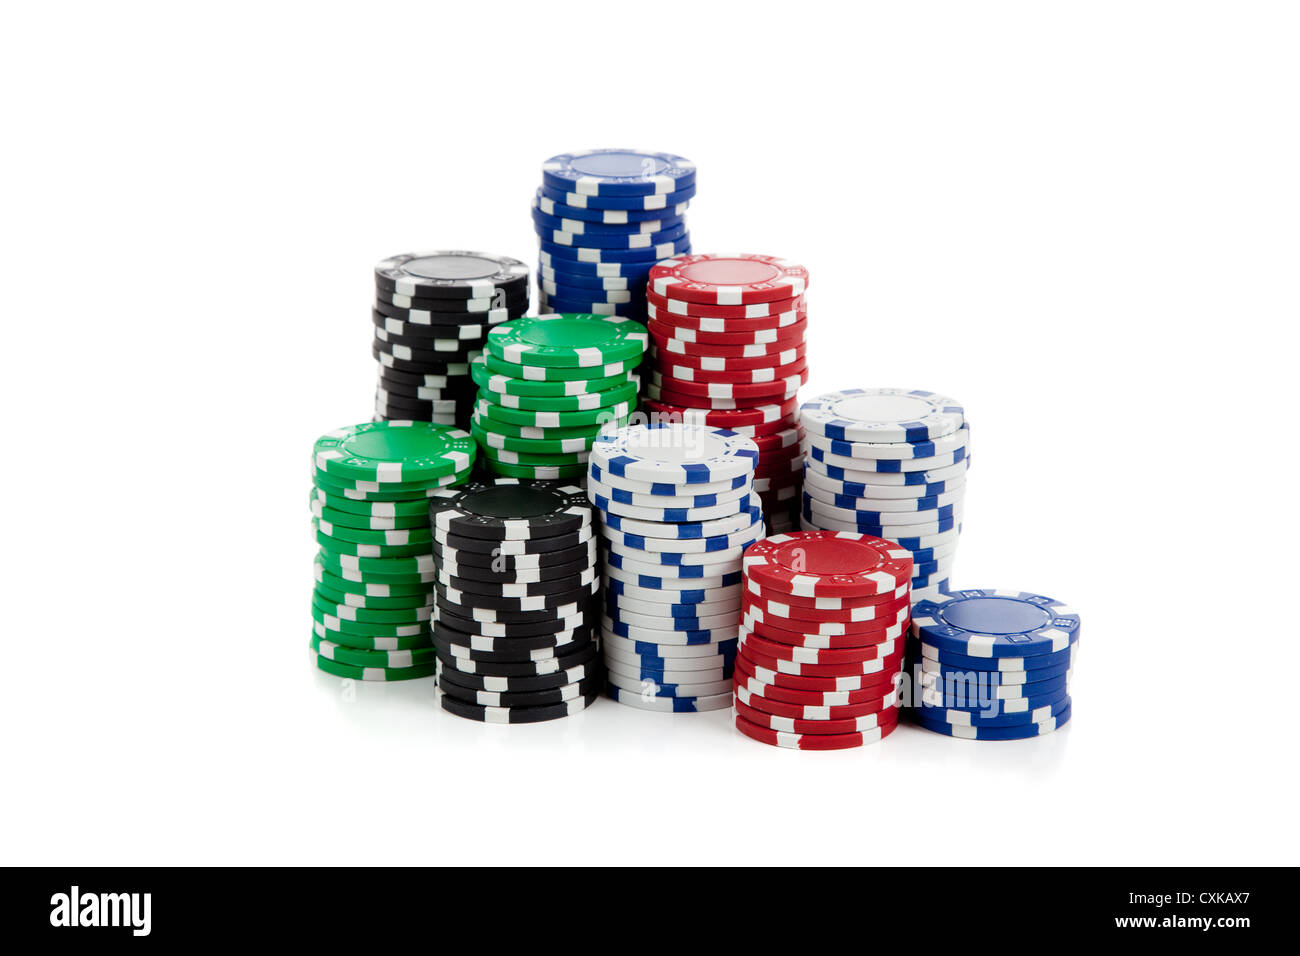 Stacks of poker chips on a white background Stock Photo